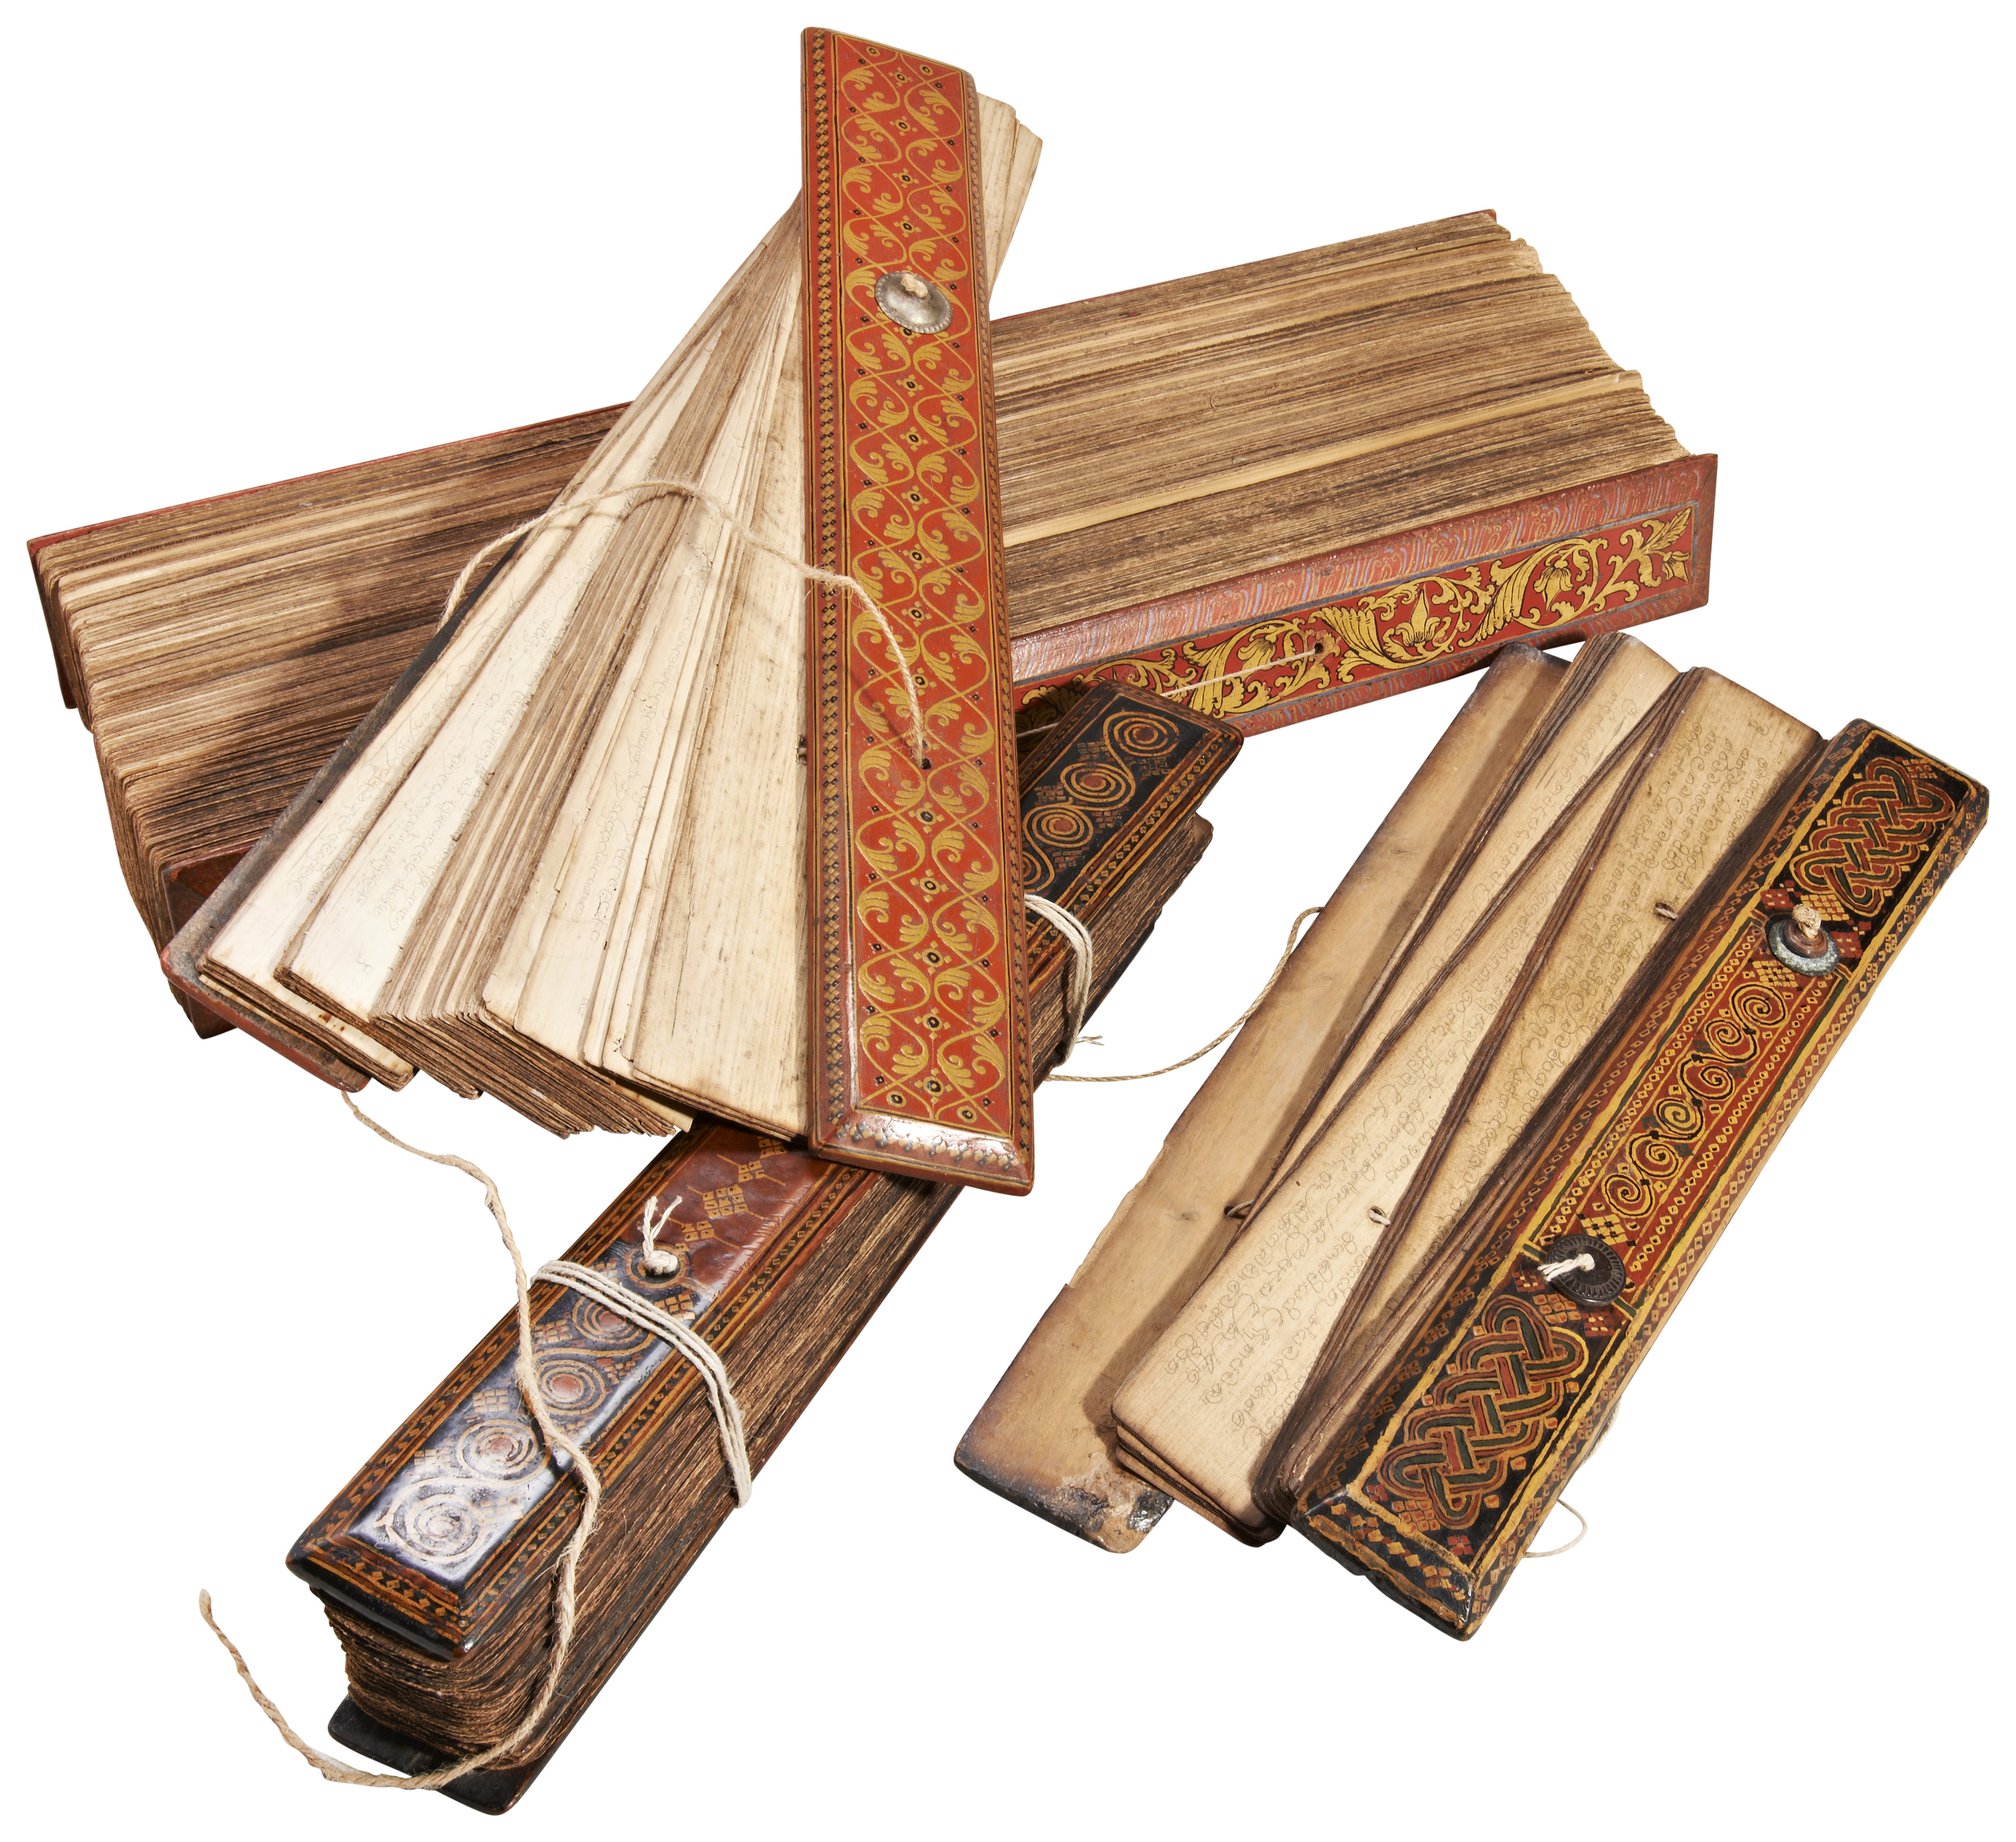 FOUR PALM-LEAF MANUSCRIPTS WITH LACQUERED BOOK COVERS  CEYLON, 18TH / 19TH CENTURY the Sinhalese